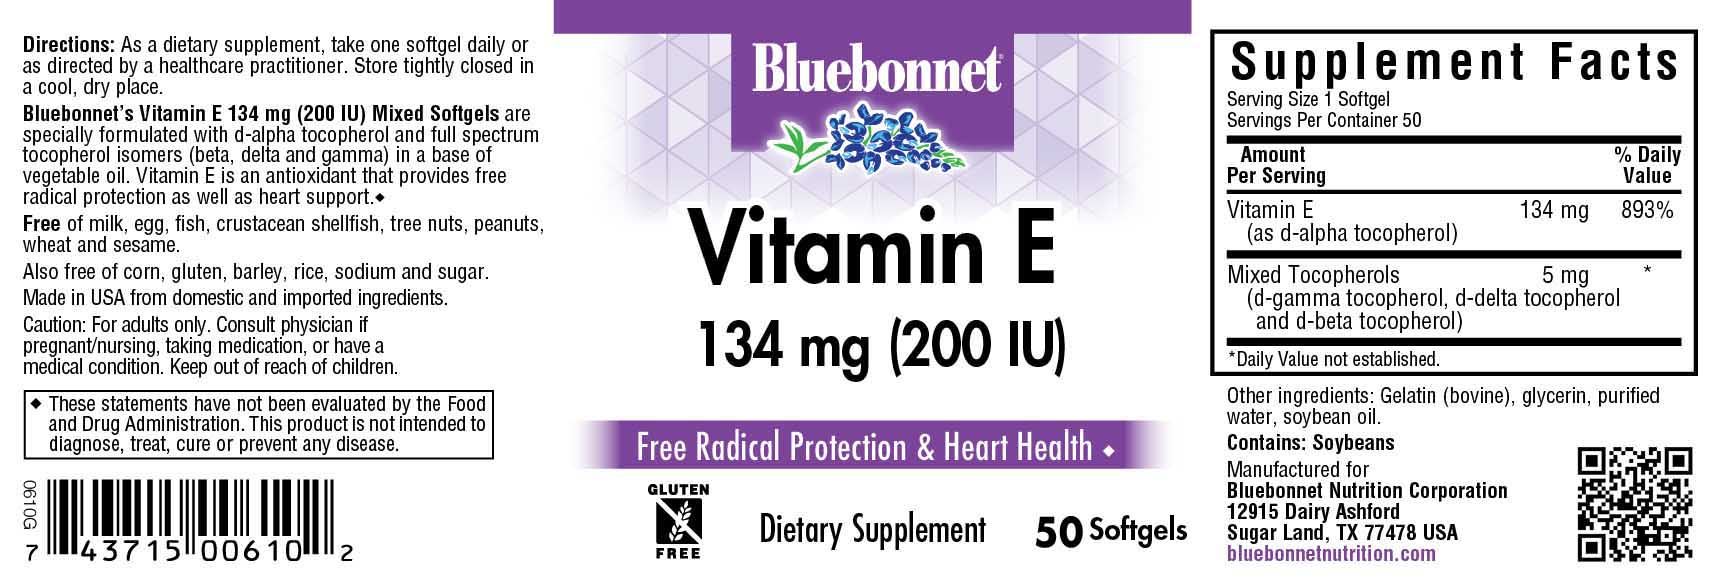 Bluebonnet’s Vitamin E 200 lU (134 mg) Mixed Softgels are specially formulated with d-alpha tocopherol and full spectrum tocopherol isomers (beta, delta and gamma) in a base of vegetable oil. Vitamin E is an antioxidant that provides free radical protection as well as cardiovascular support. #size_50 count